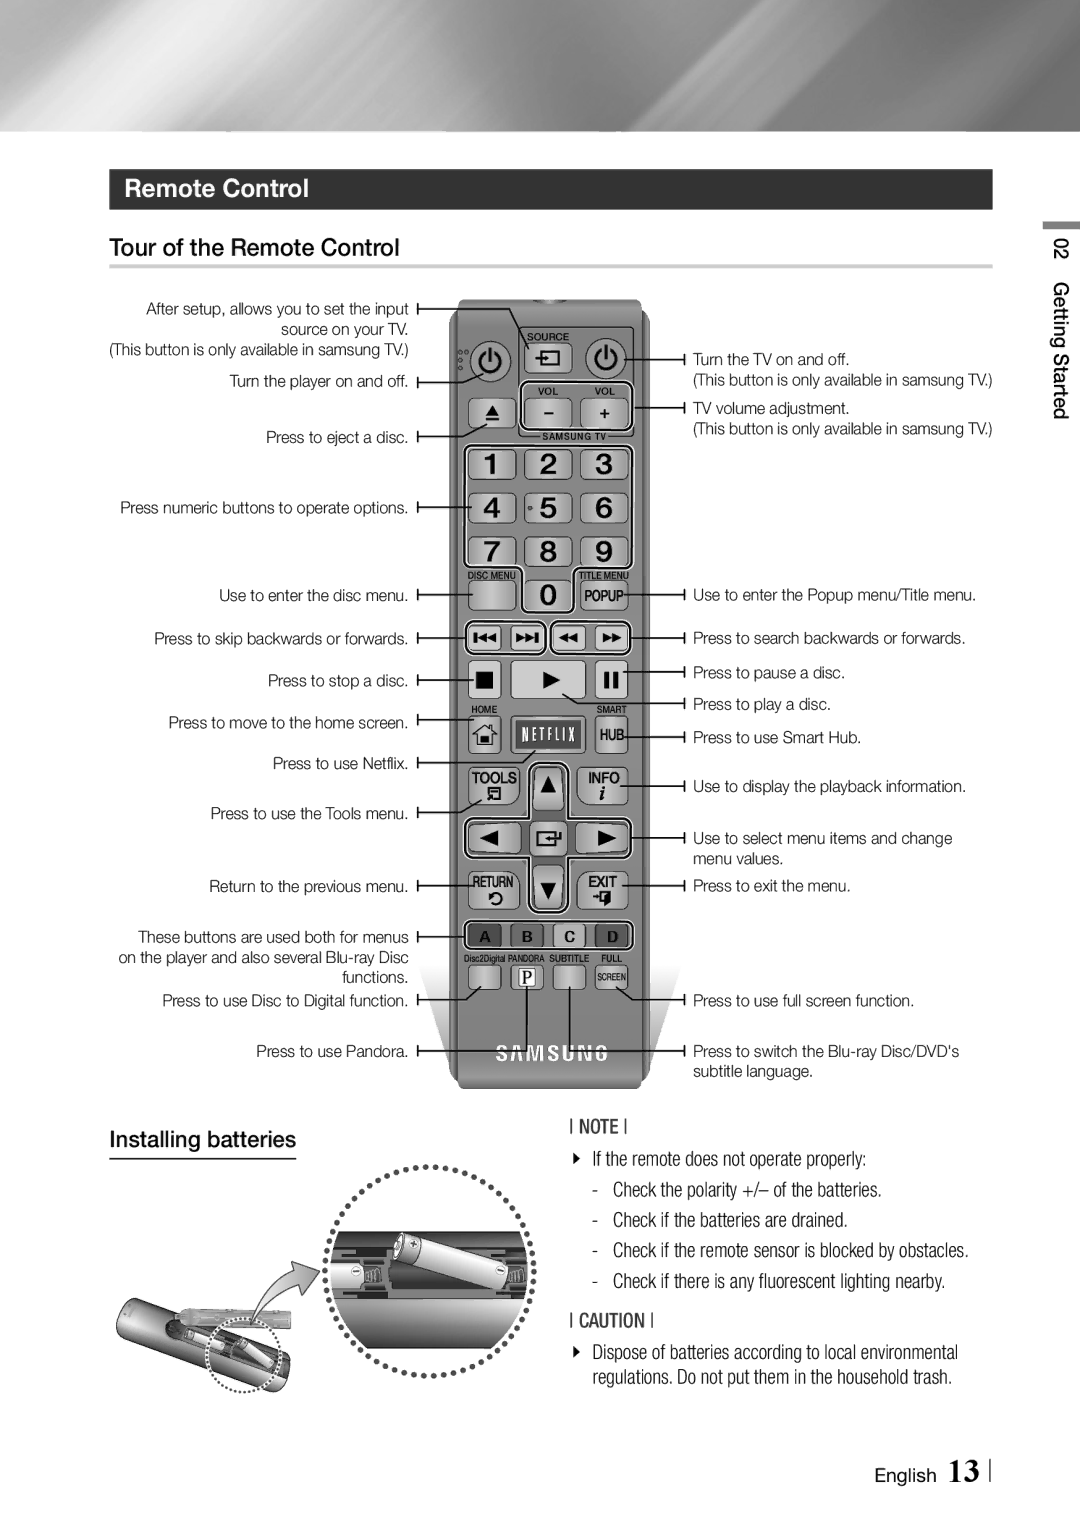 Samsung BD-ES6000/ZA user manual Tour of the Remote Control, Installing batteries 